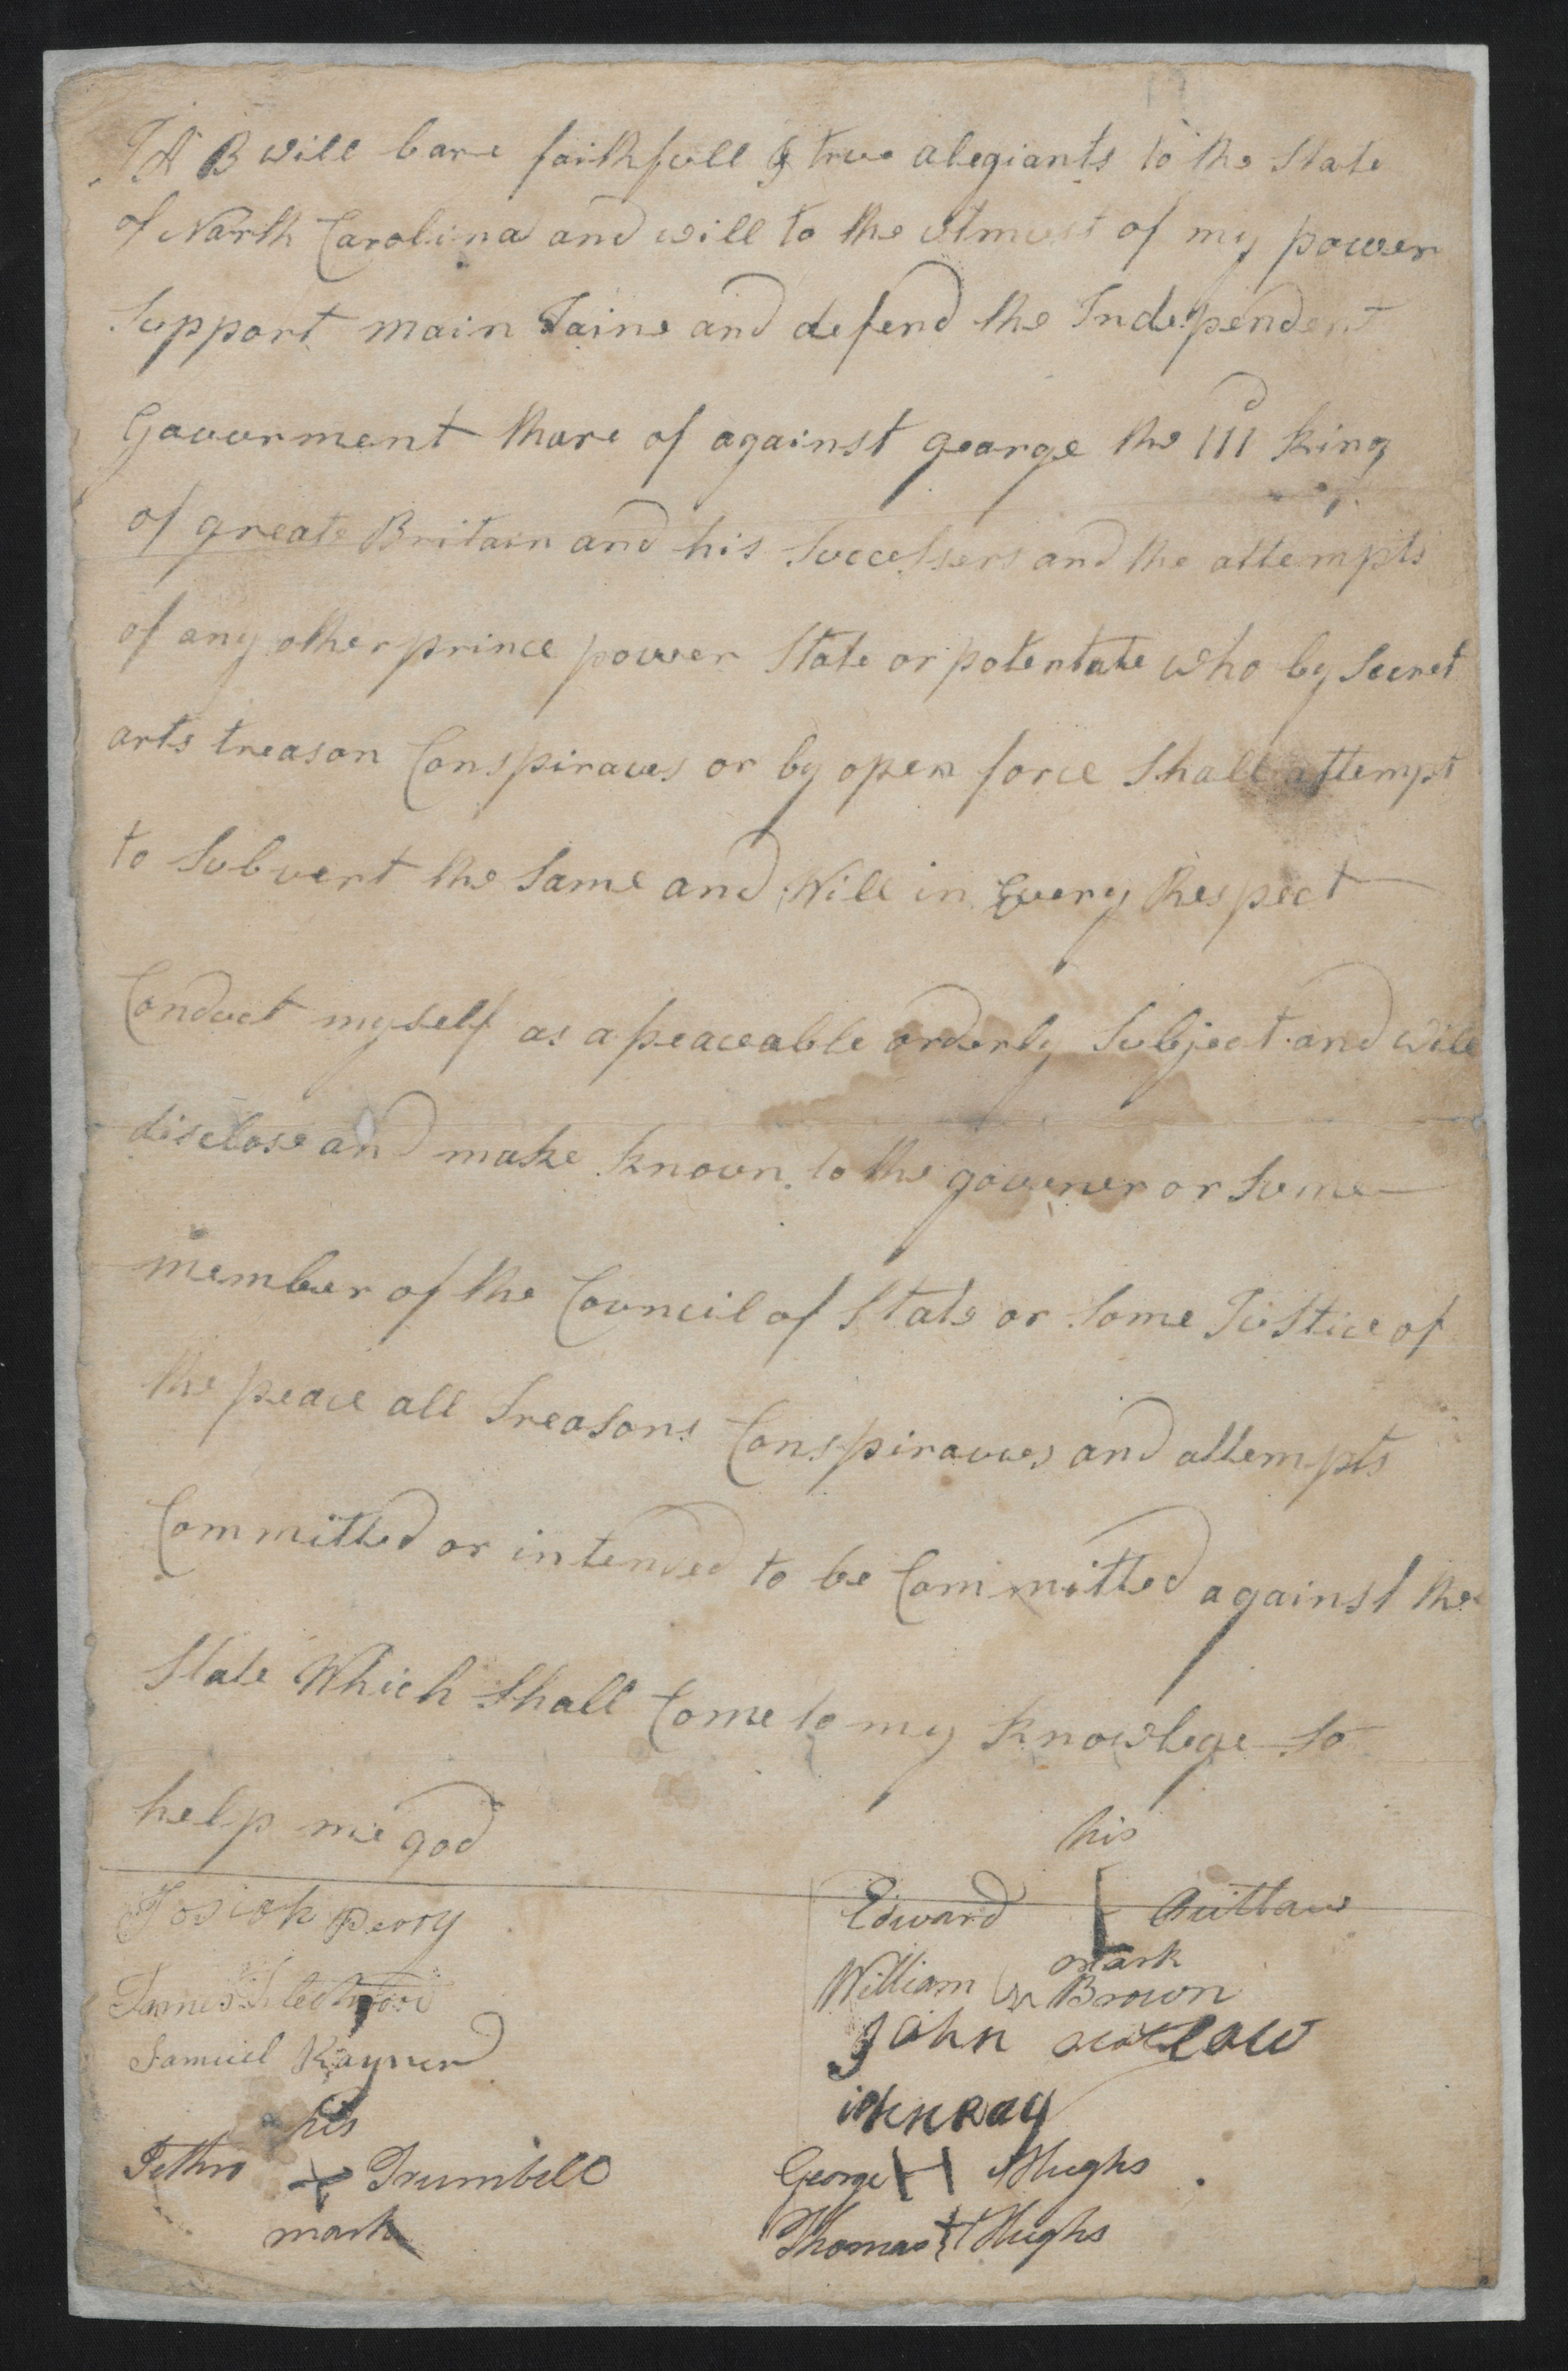 List of People Swearing the Oath of Allegiance to the State of North Carolina in Bertie County, circa 1778, page 1